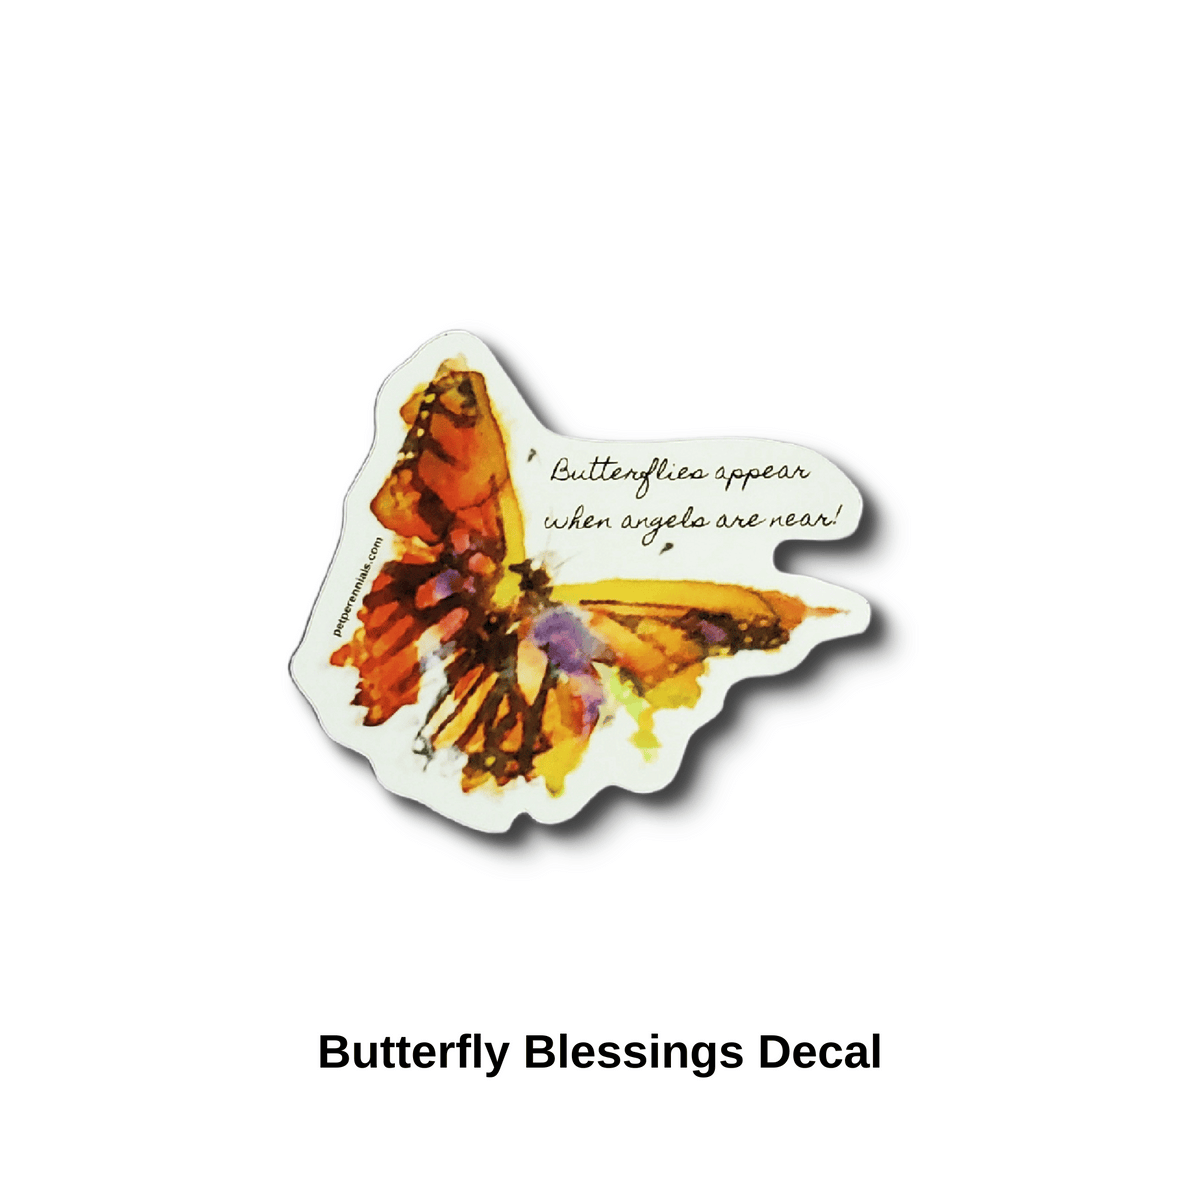 Butterfly Blessings Decal